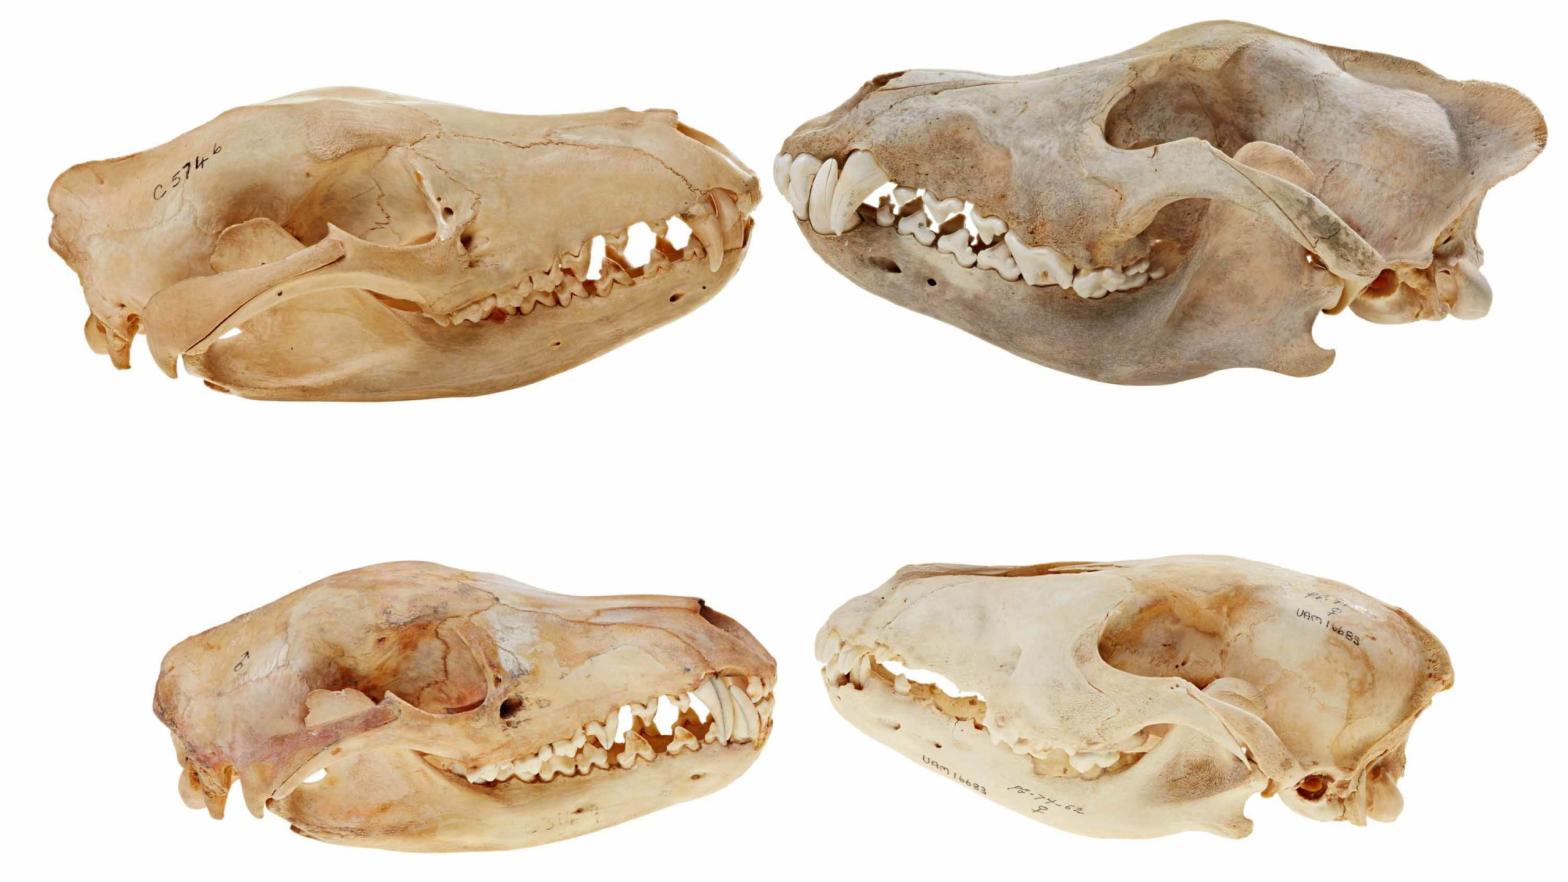 Adult and juvenile thylacine skulls (left) facing grey wolf skulls (right). (Image: The Pask Lab)